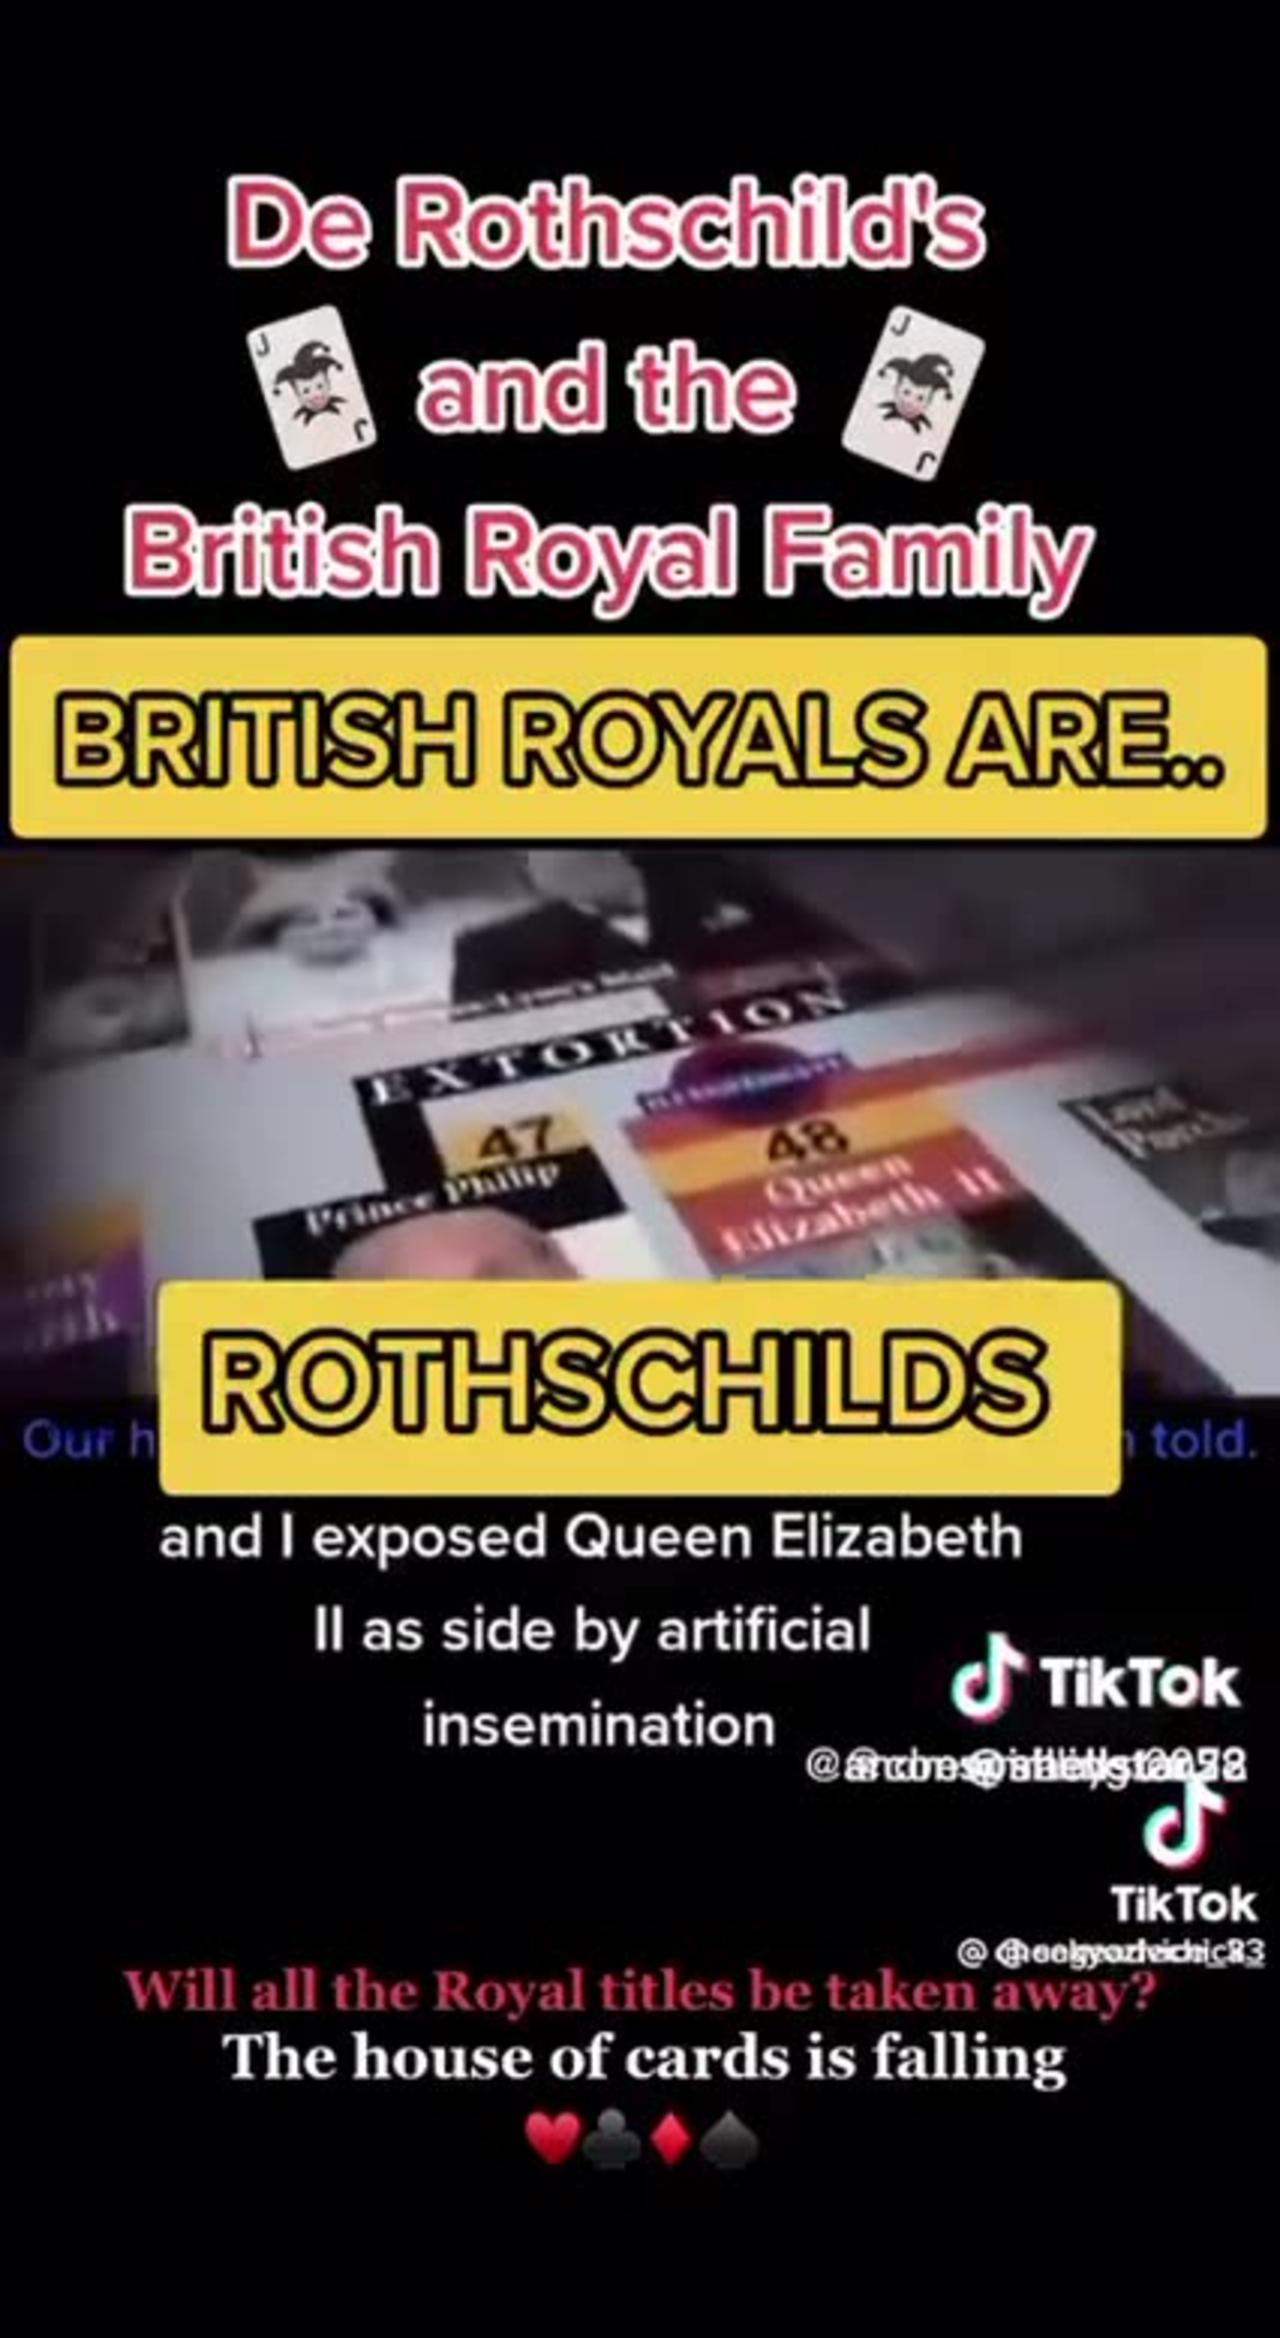 THE 'BRITISH ROYALS' ☭ ARE REALLY ROTHSCHILDS